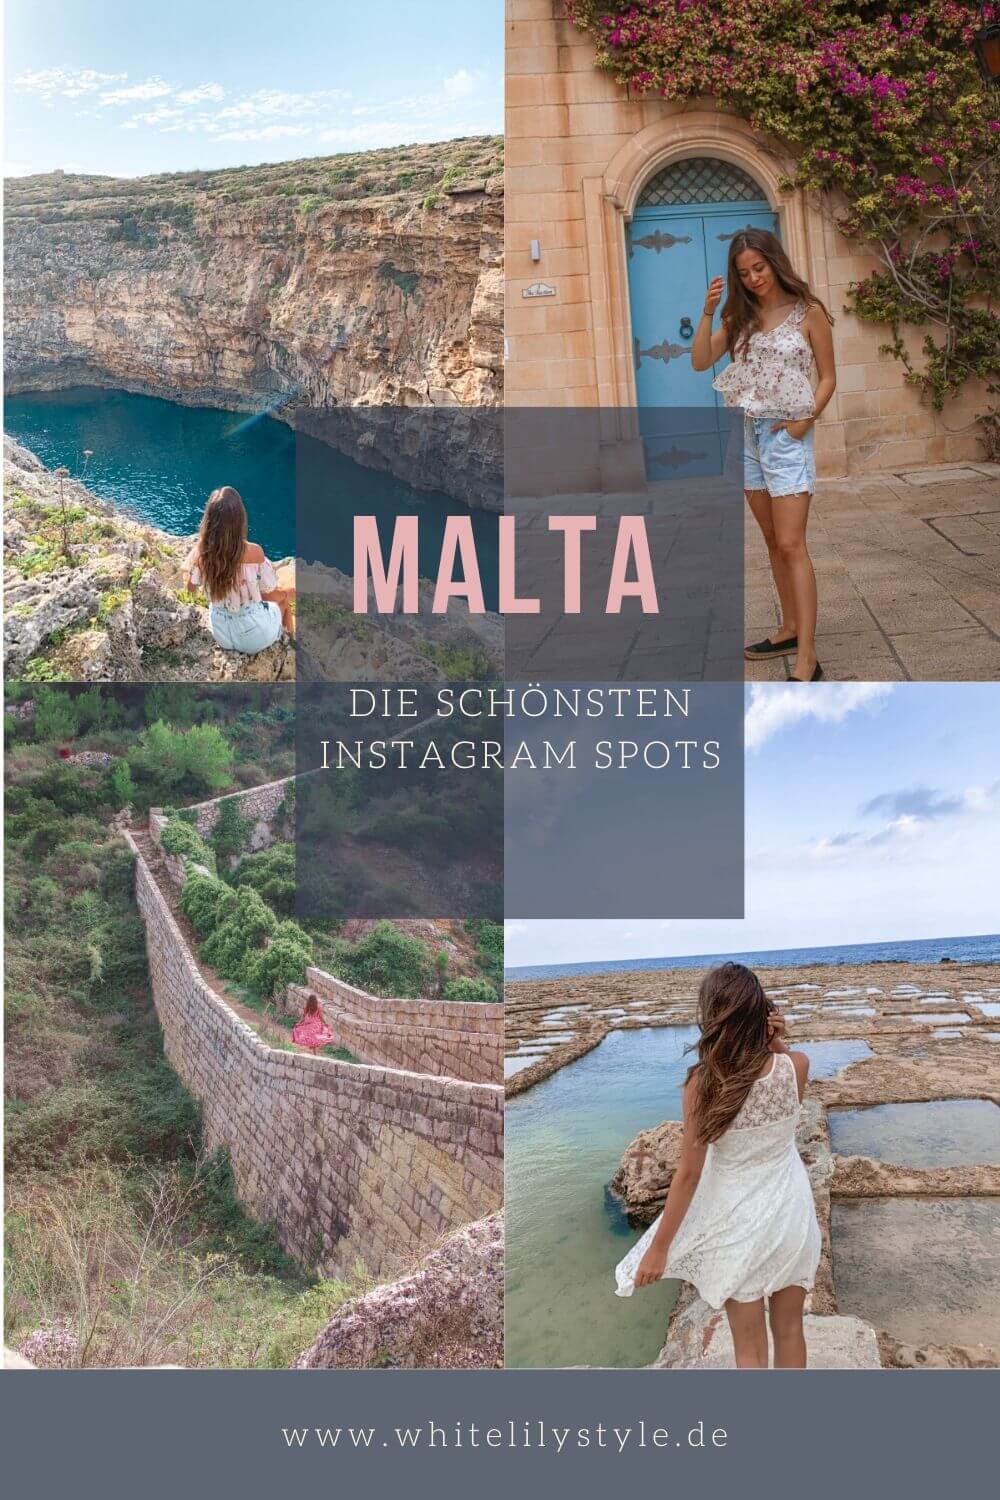 10 Instagram Spots in Malta and the most wonderful highlights